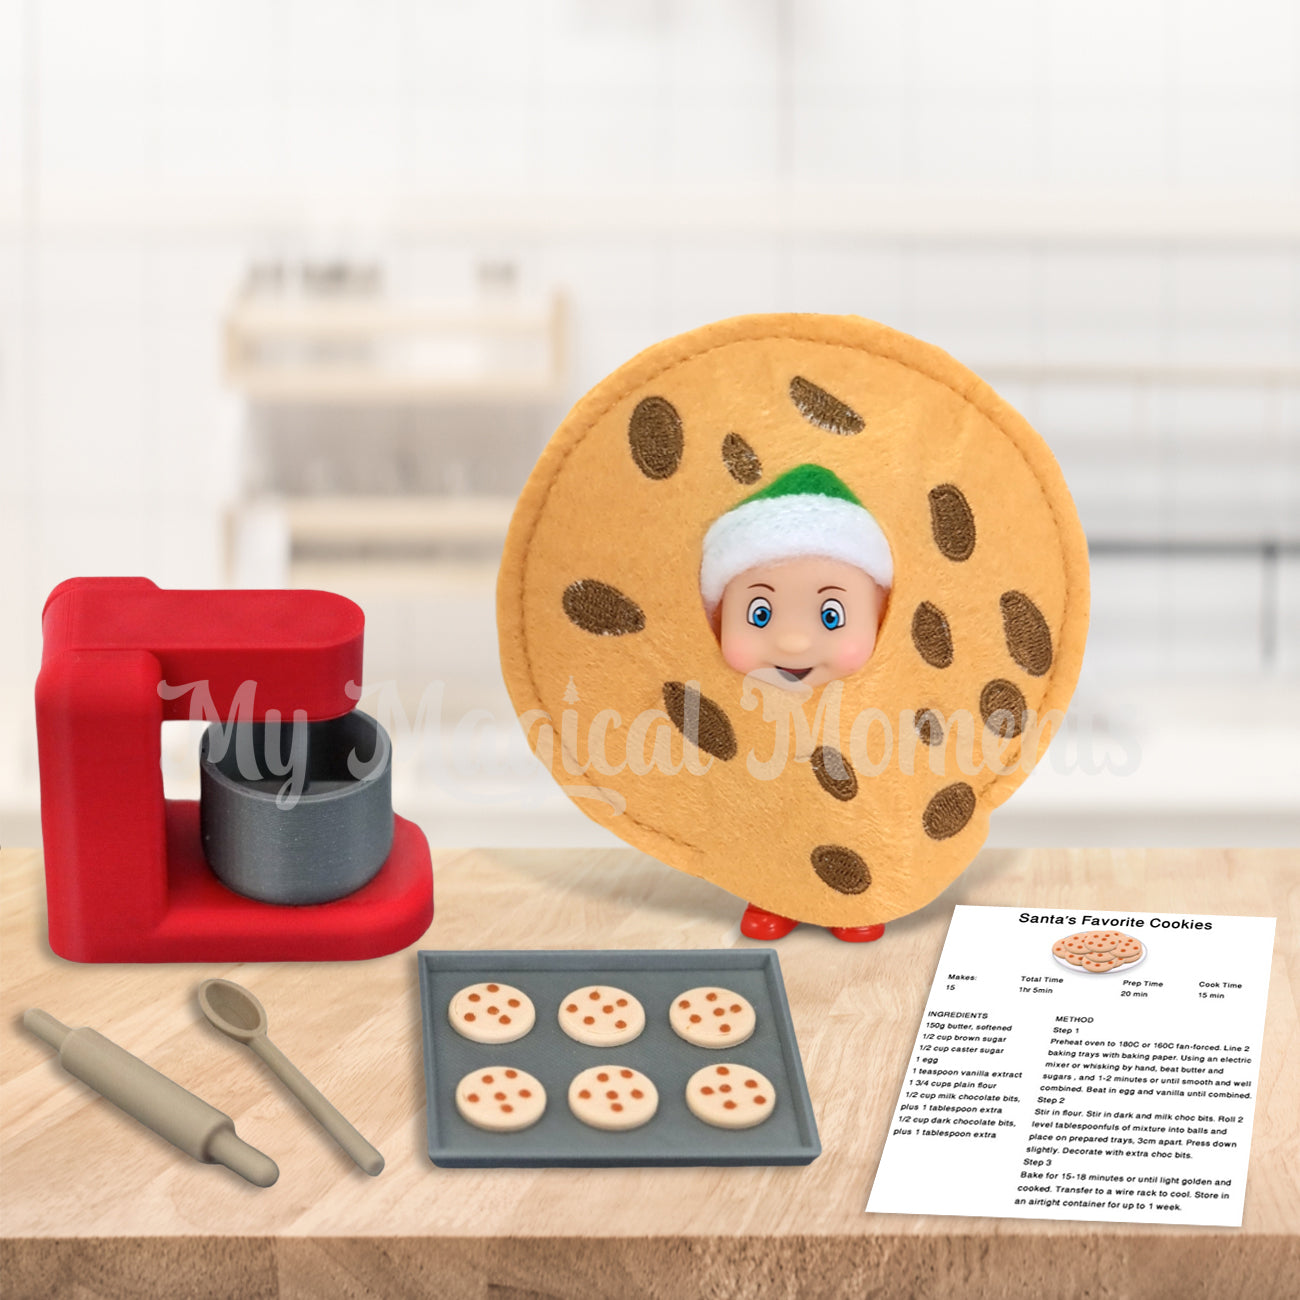 Elf baby dressed as a cookie baking